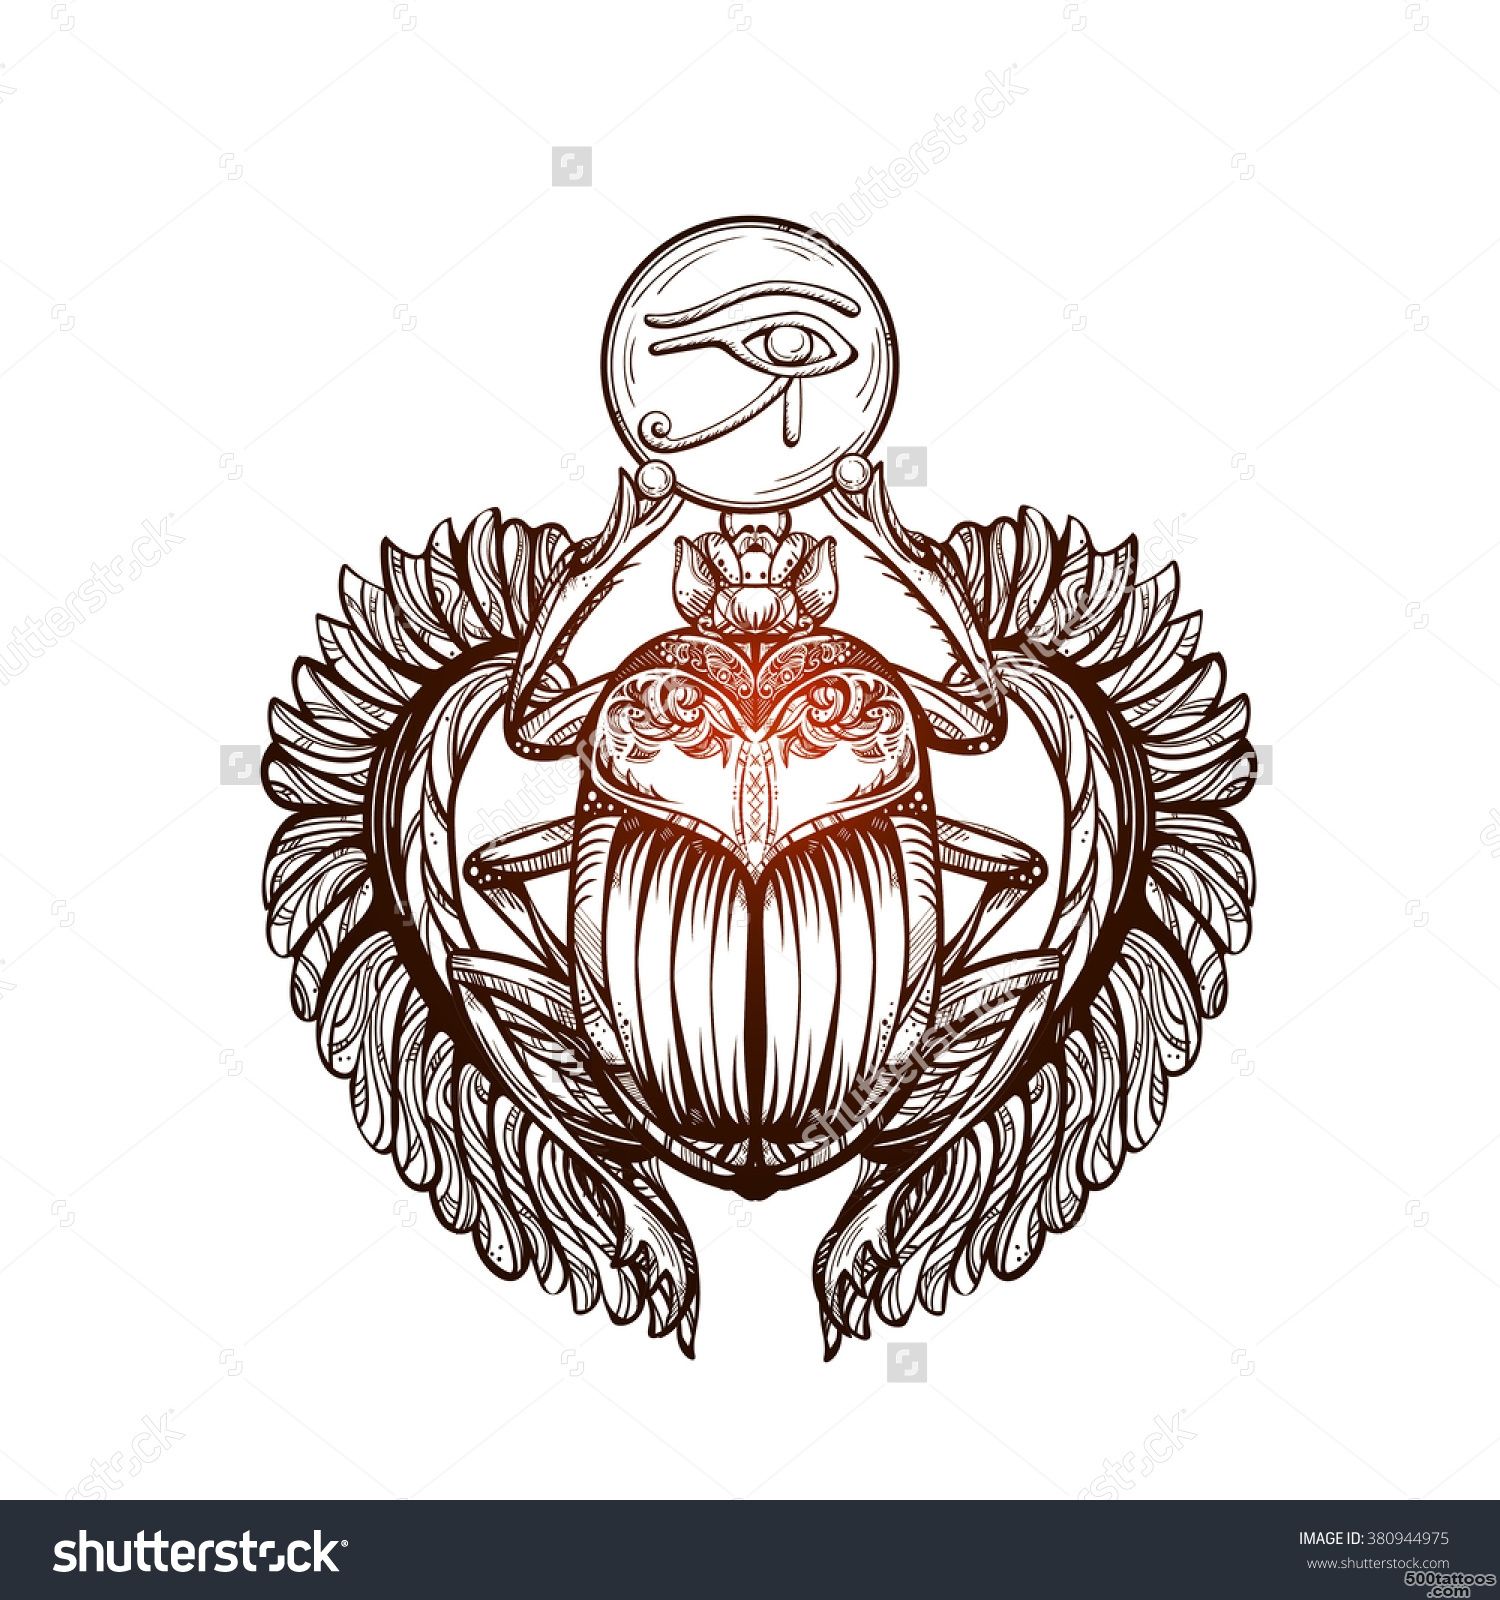 Isolated Vector Tattoo Image Black Scarab Beetleon A White ..._42